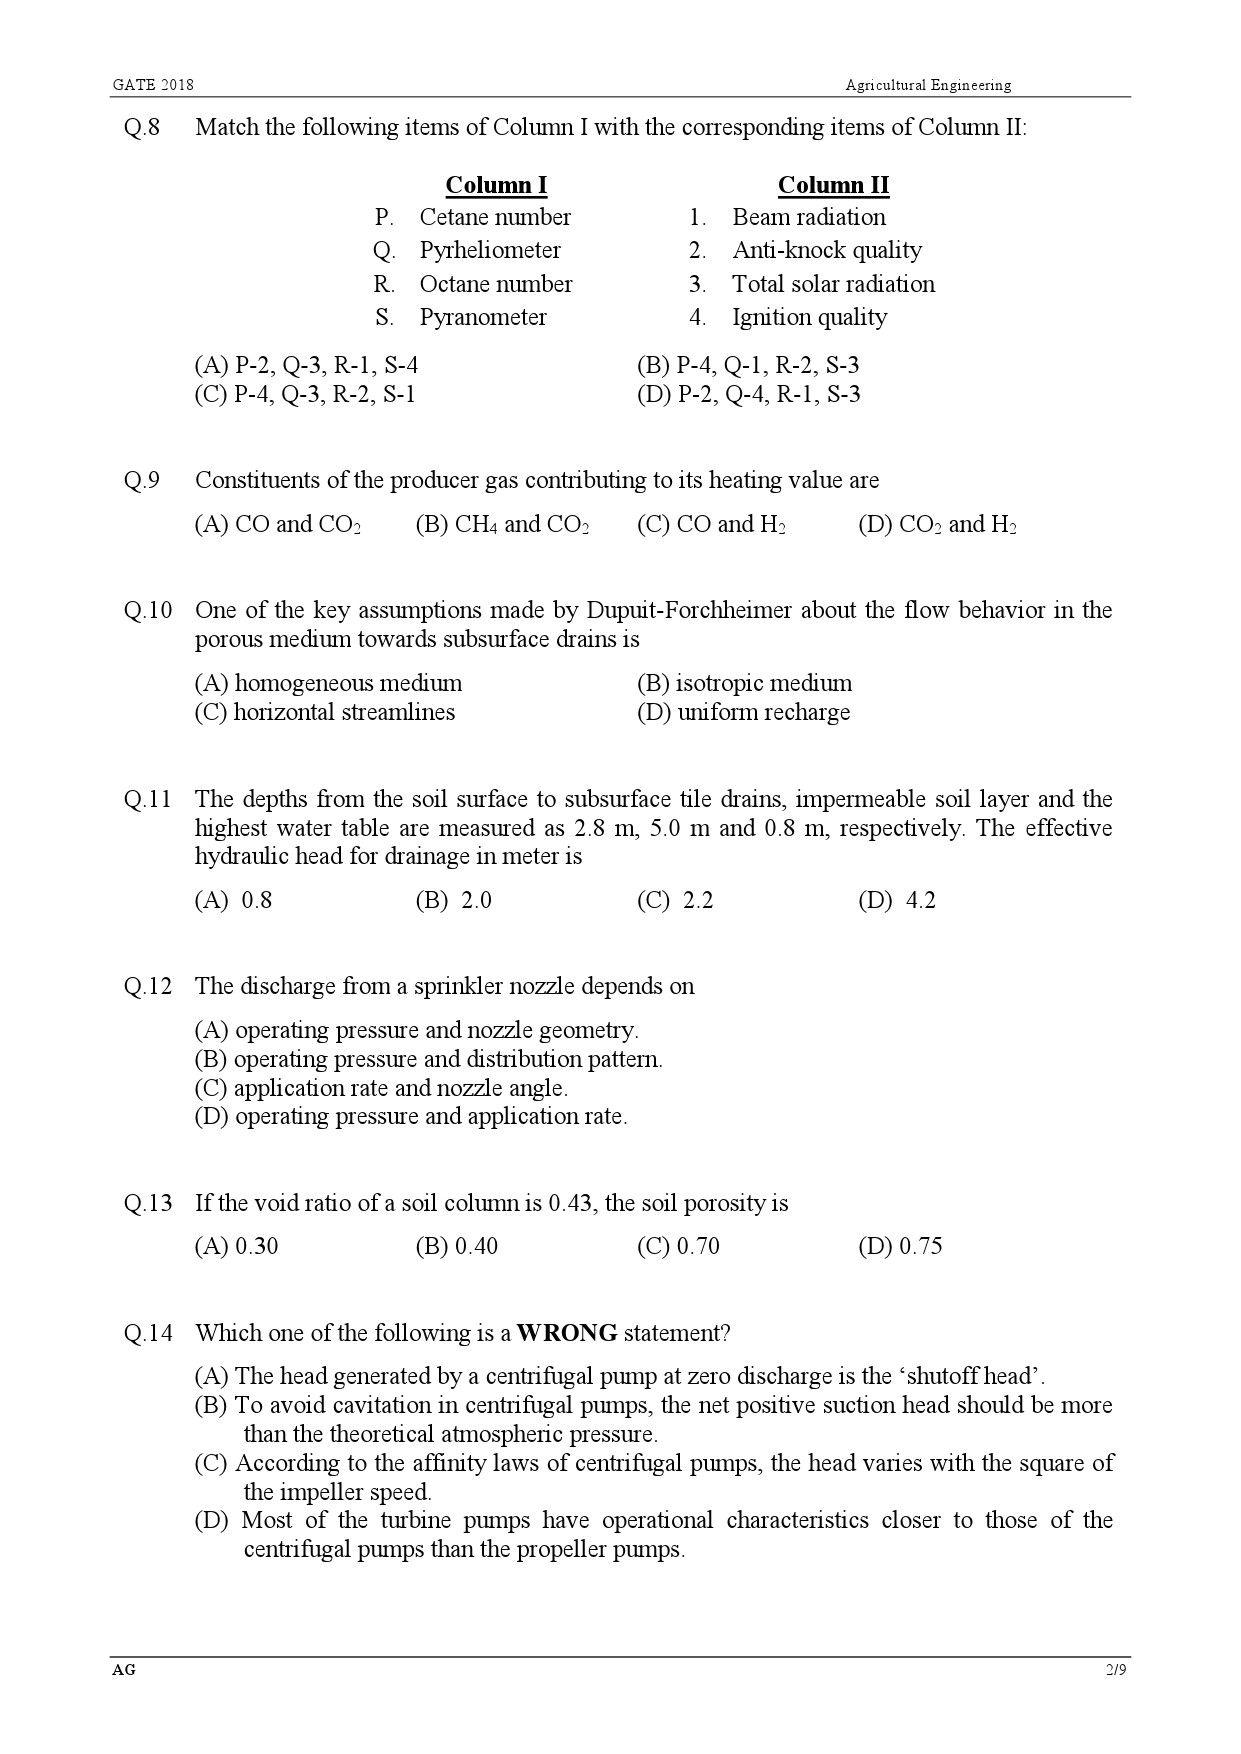 GATE Exam Question Paper 2018 Agricultural Engineering 2